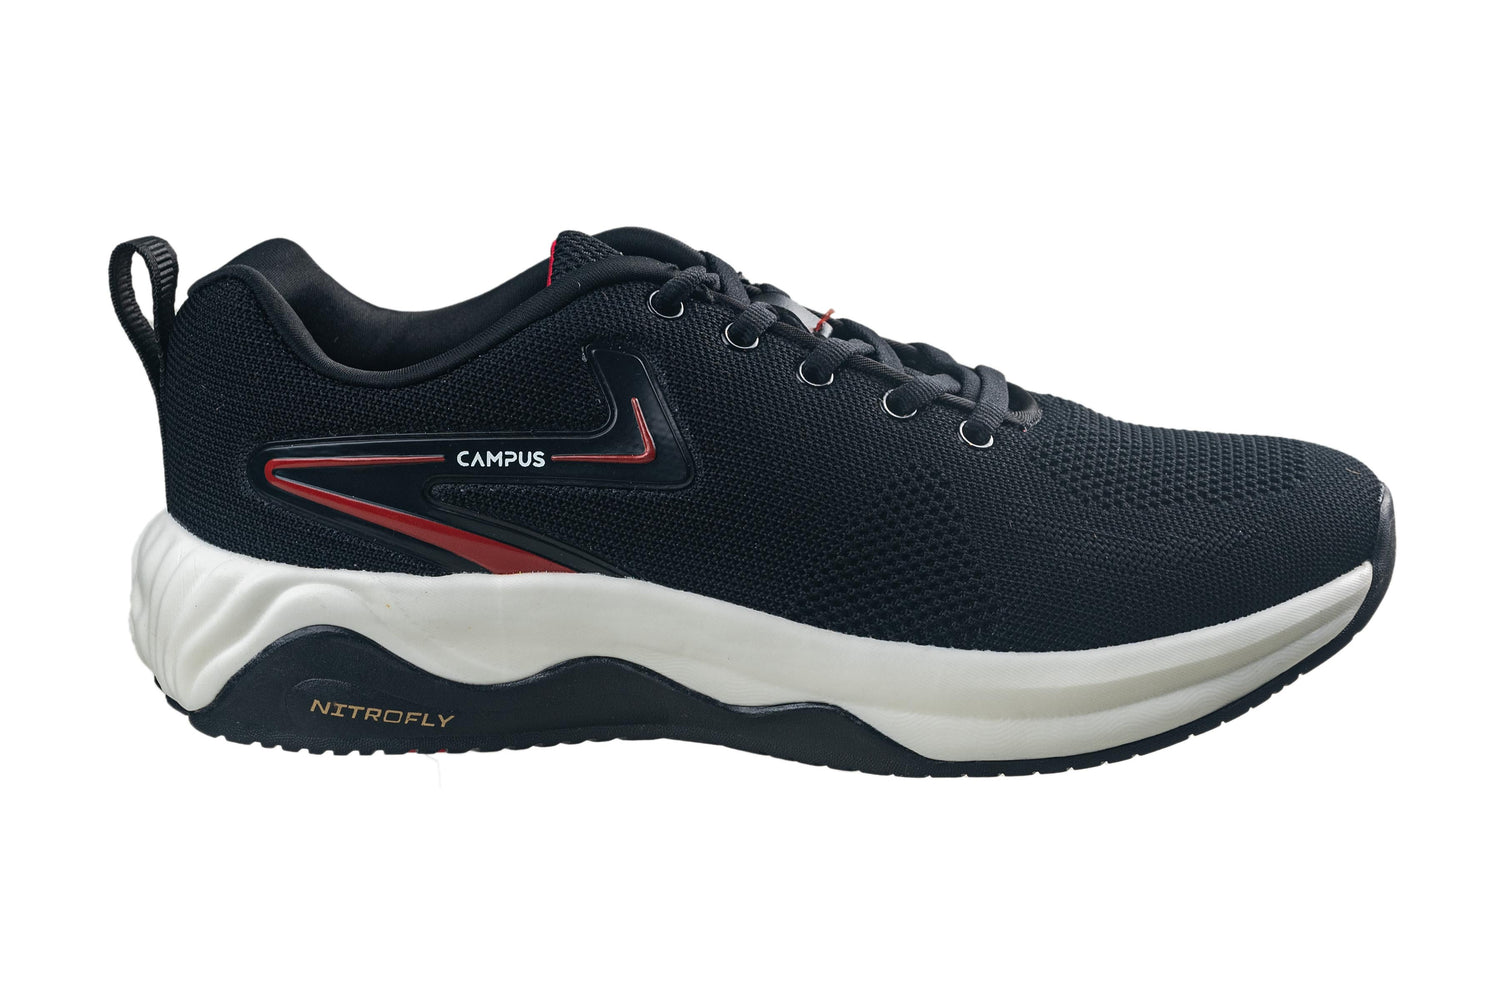 Campus Gents Black / Red Sports Shoe